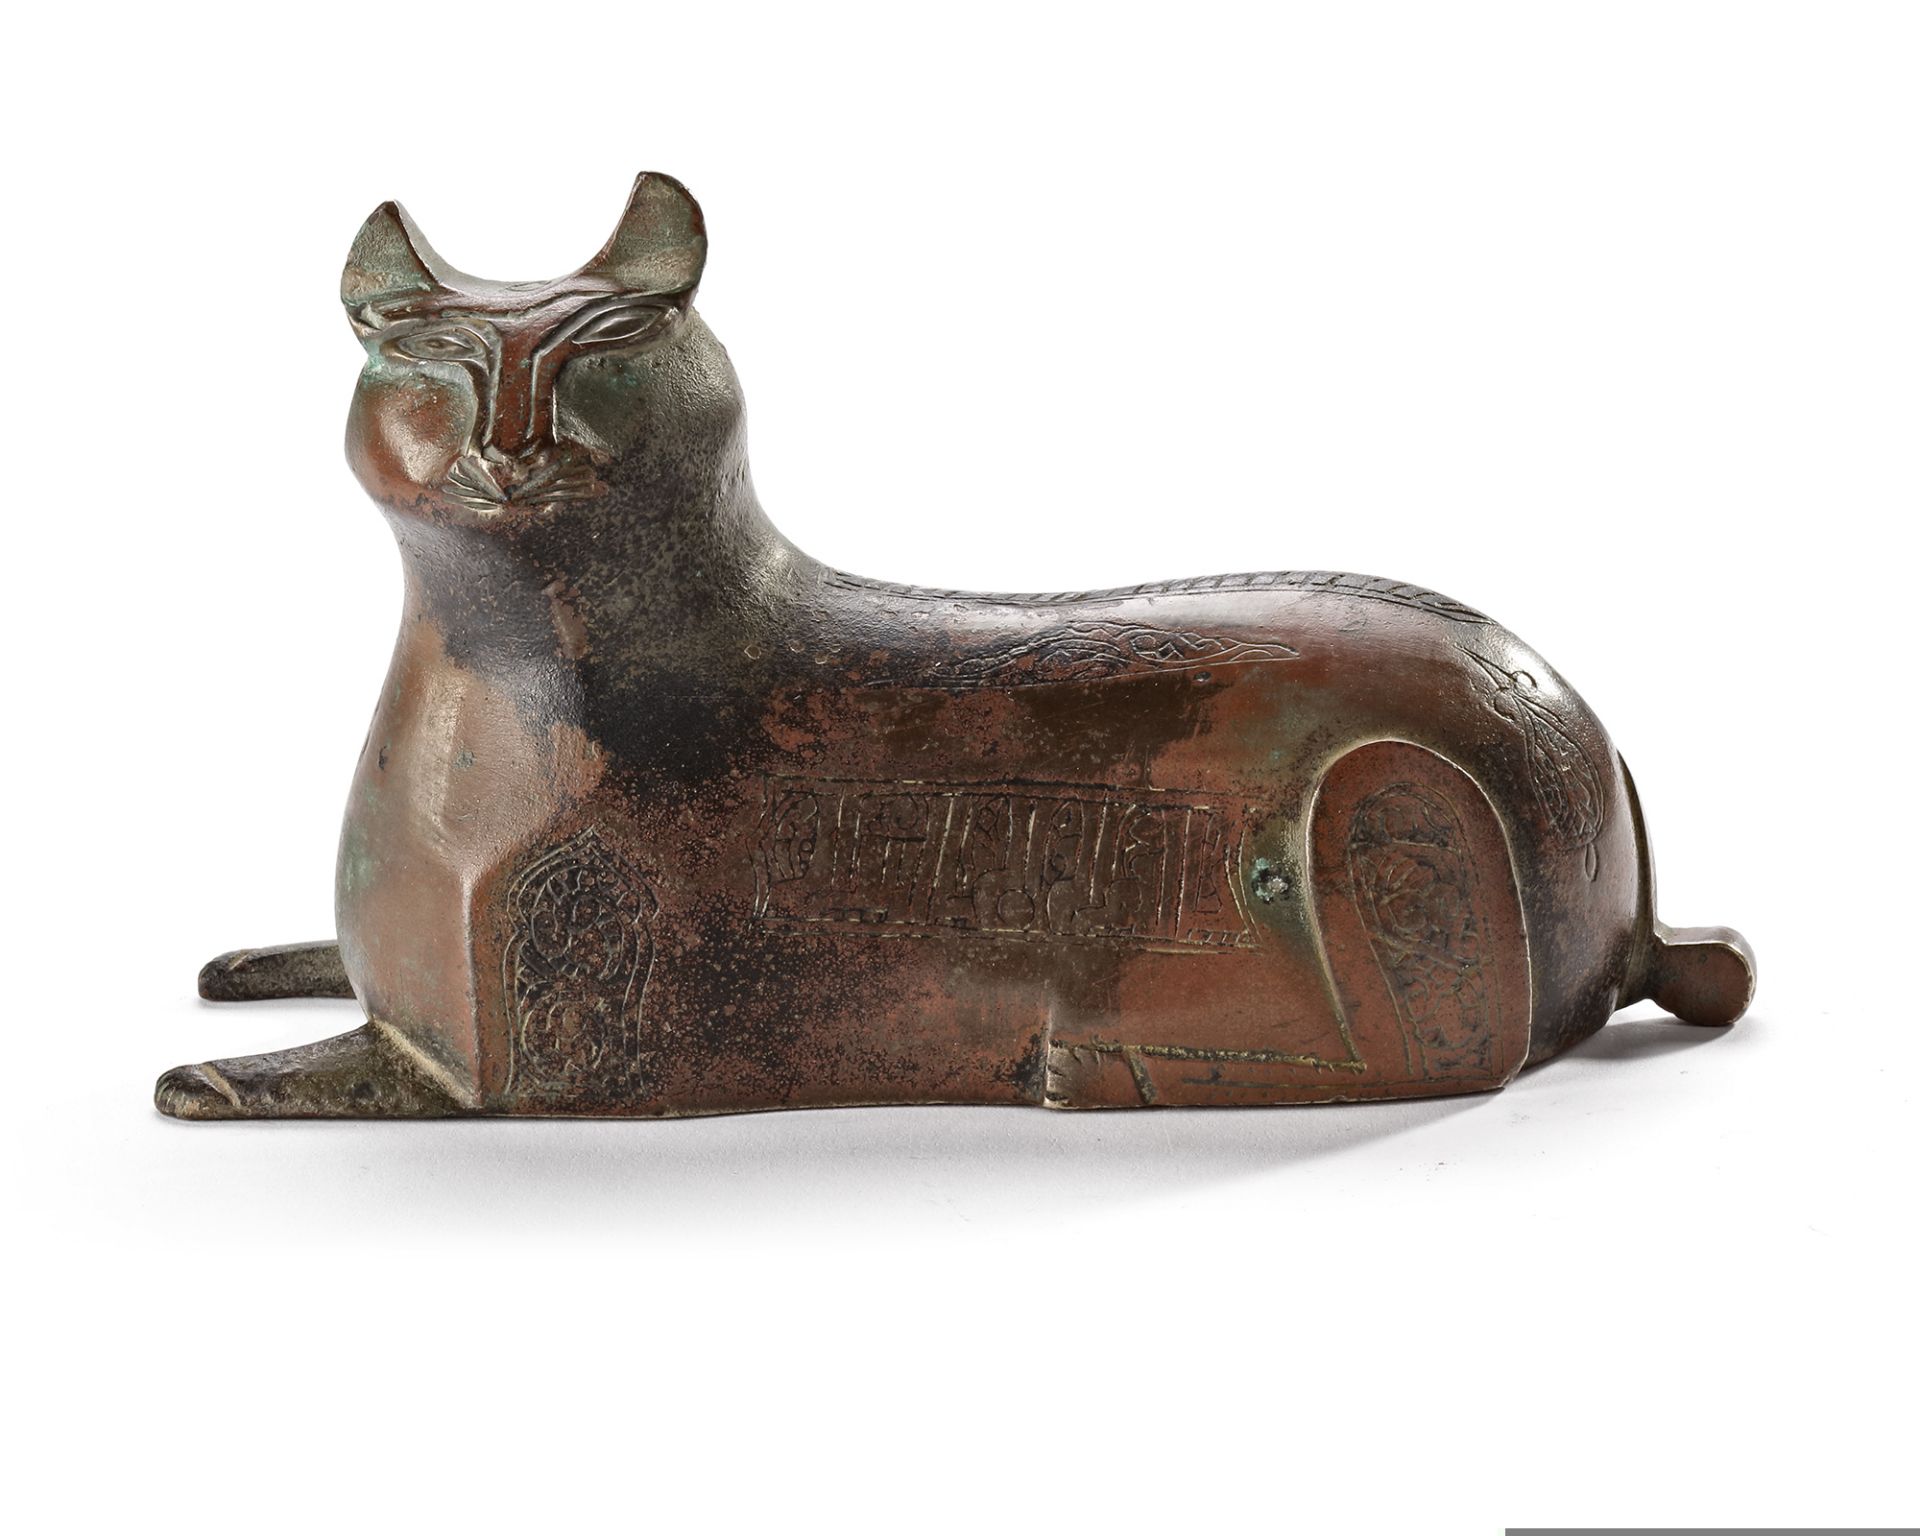 A KHORASAN BRONZE WEIGHT FIGURINE IN THE FORM OF A LION, PERSIA, 12TH CENTURY